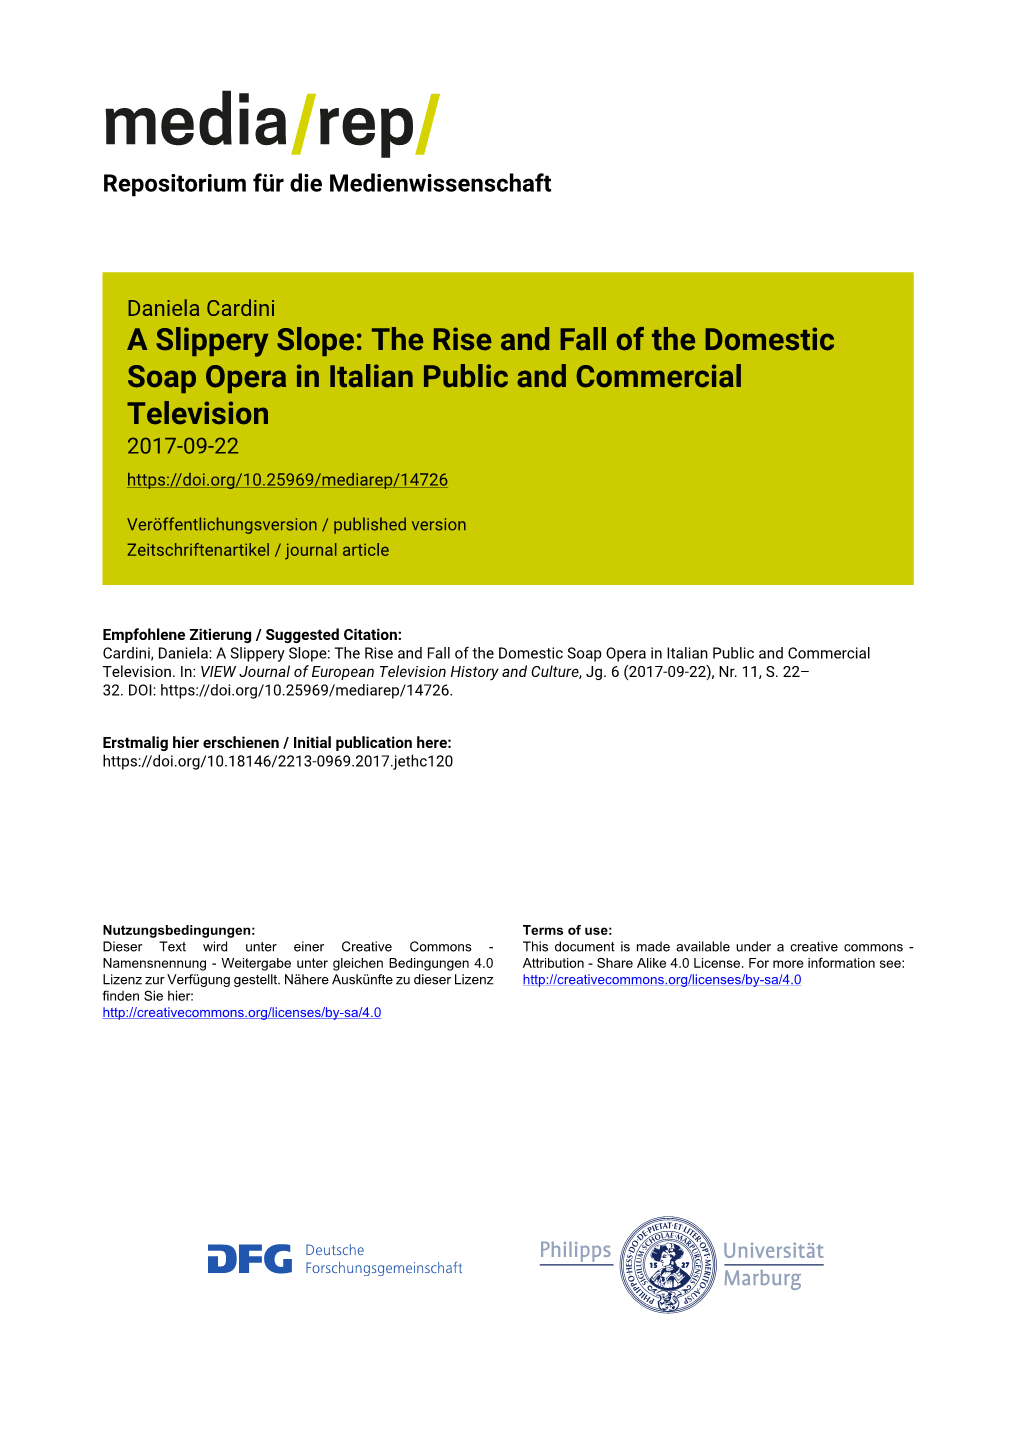 A Slippery Slope: the Rise and Fall of the Domestic Soap Opera in Italian Public and Commercial Television 2017-09-22